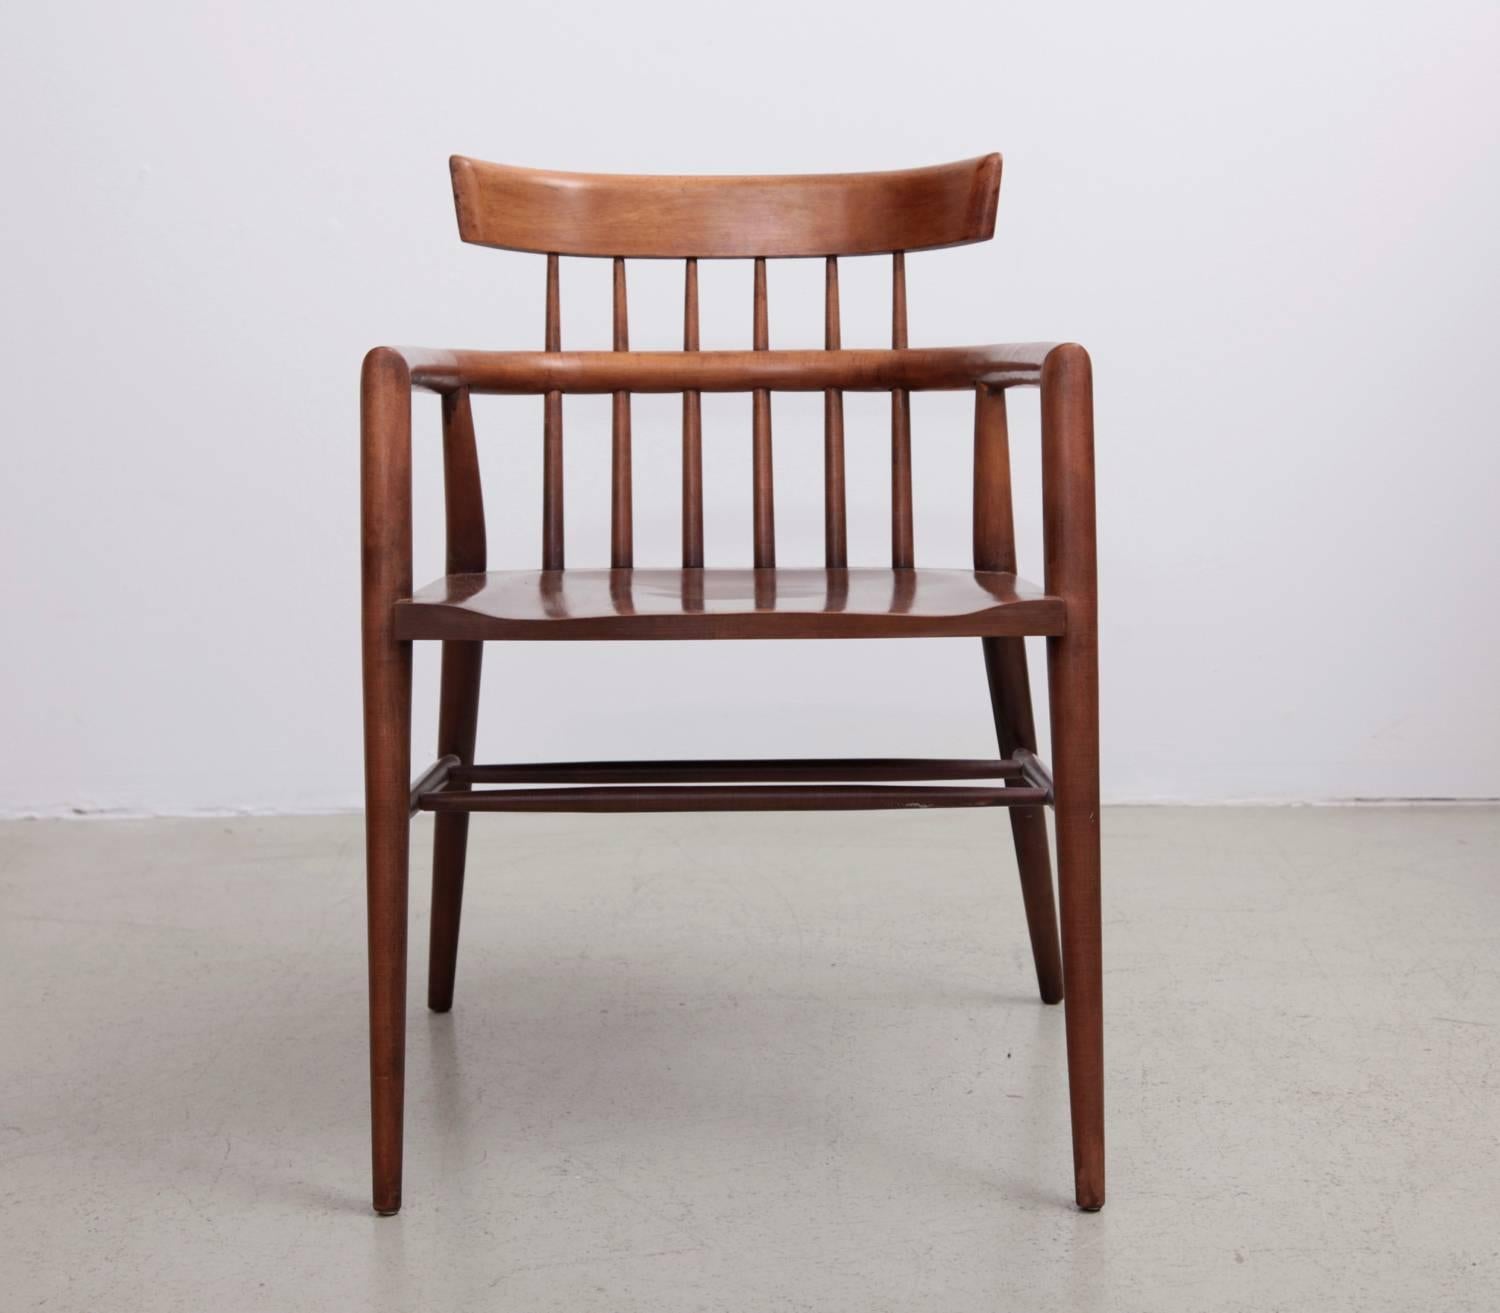 Mid-Century Modern, maple wood, spindle back, windsor style chair by Paul McCobb for Planner Group in restored condition.

